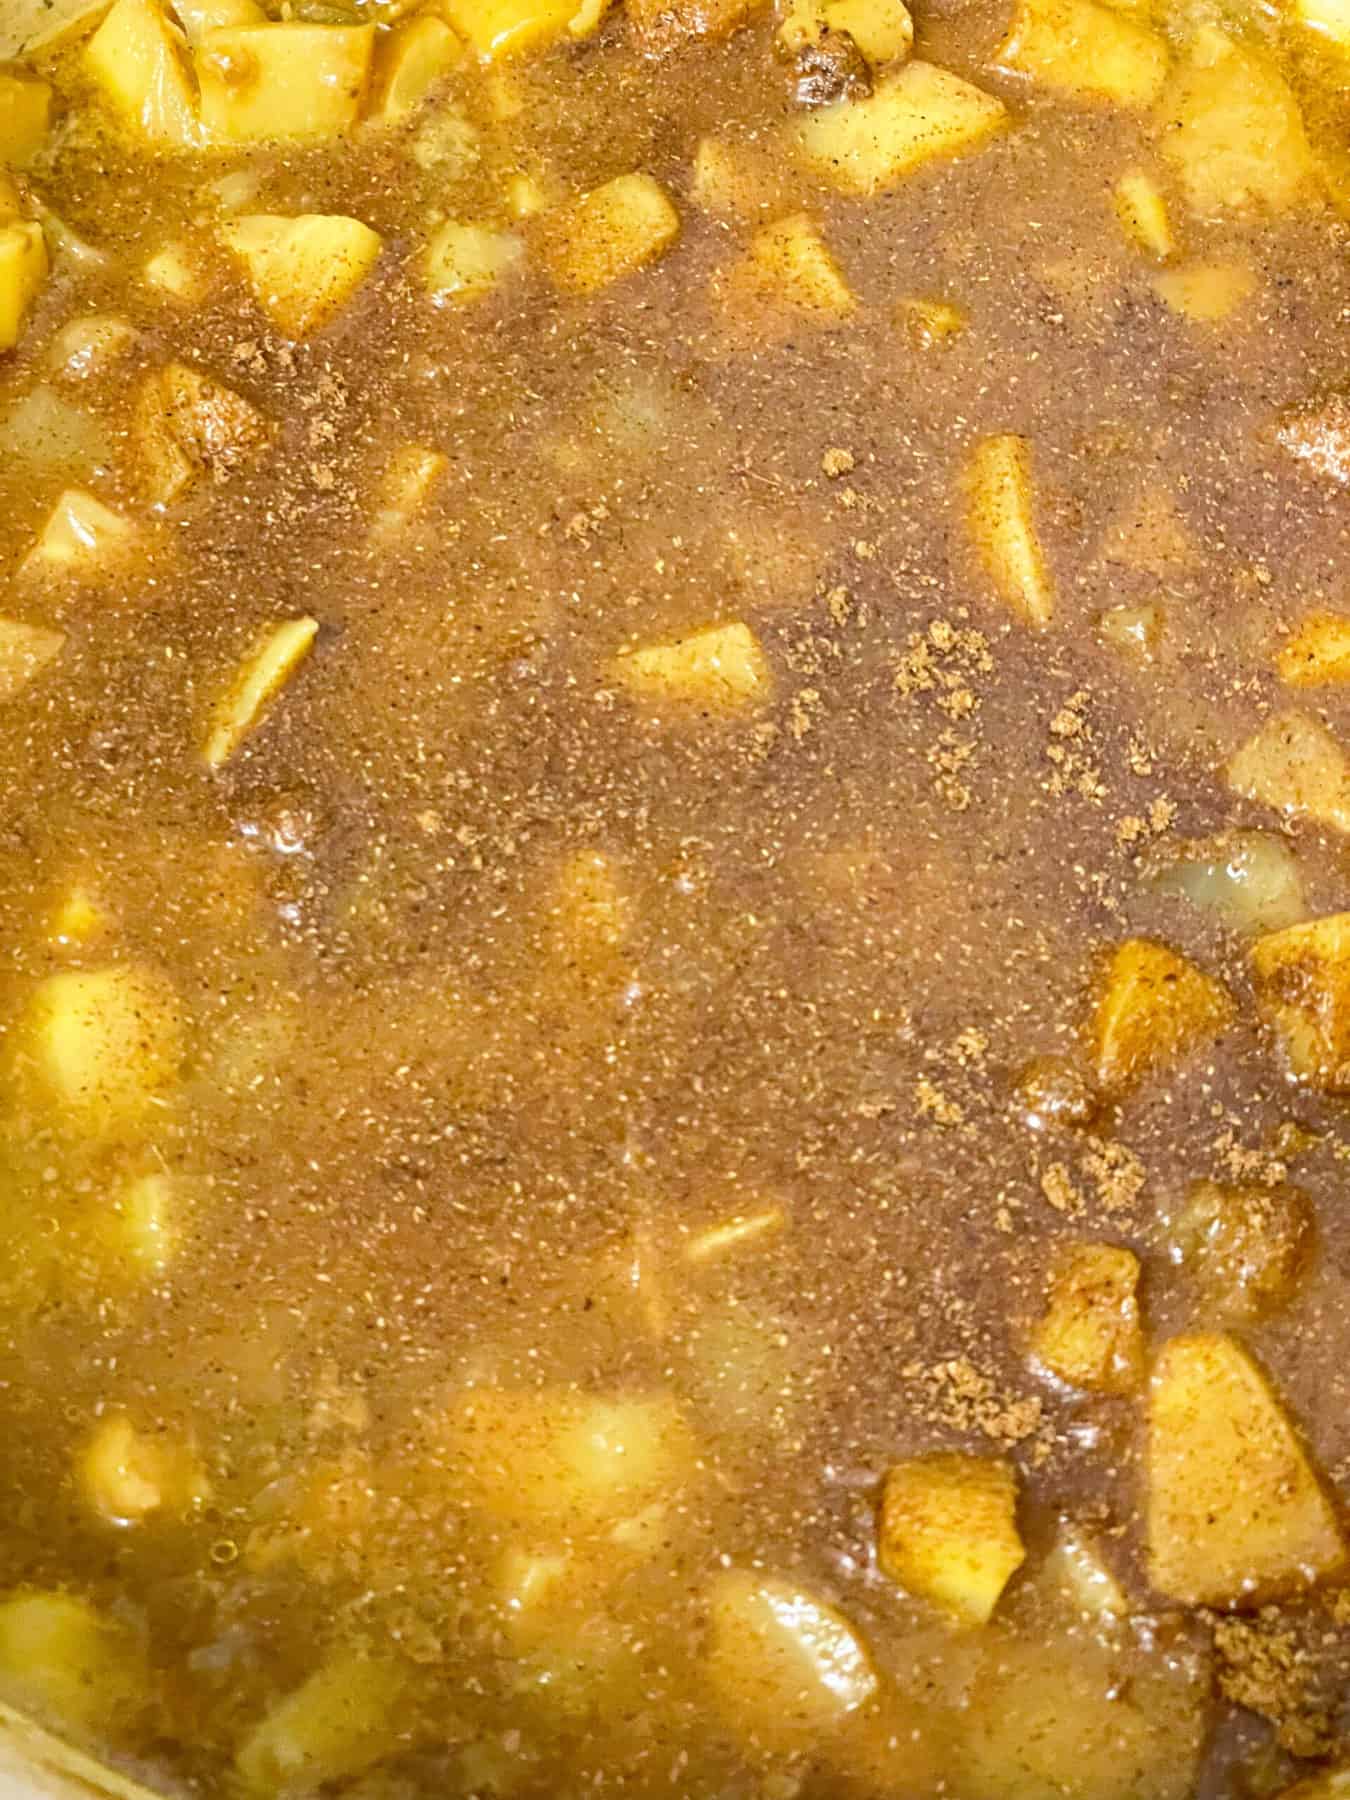 Garam masala spice blend added to the cooked curried parsnip soup.